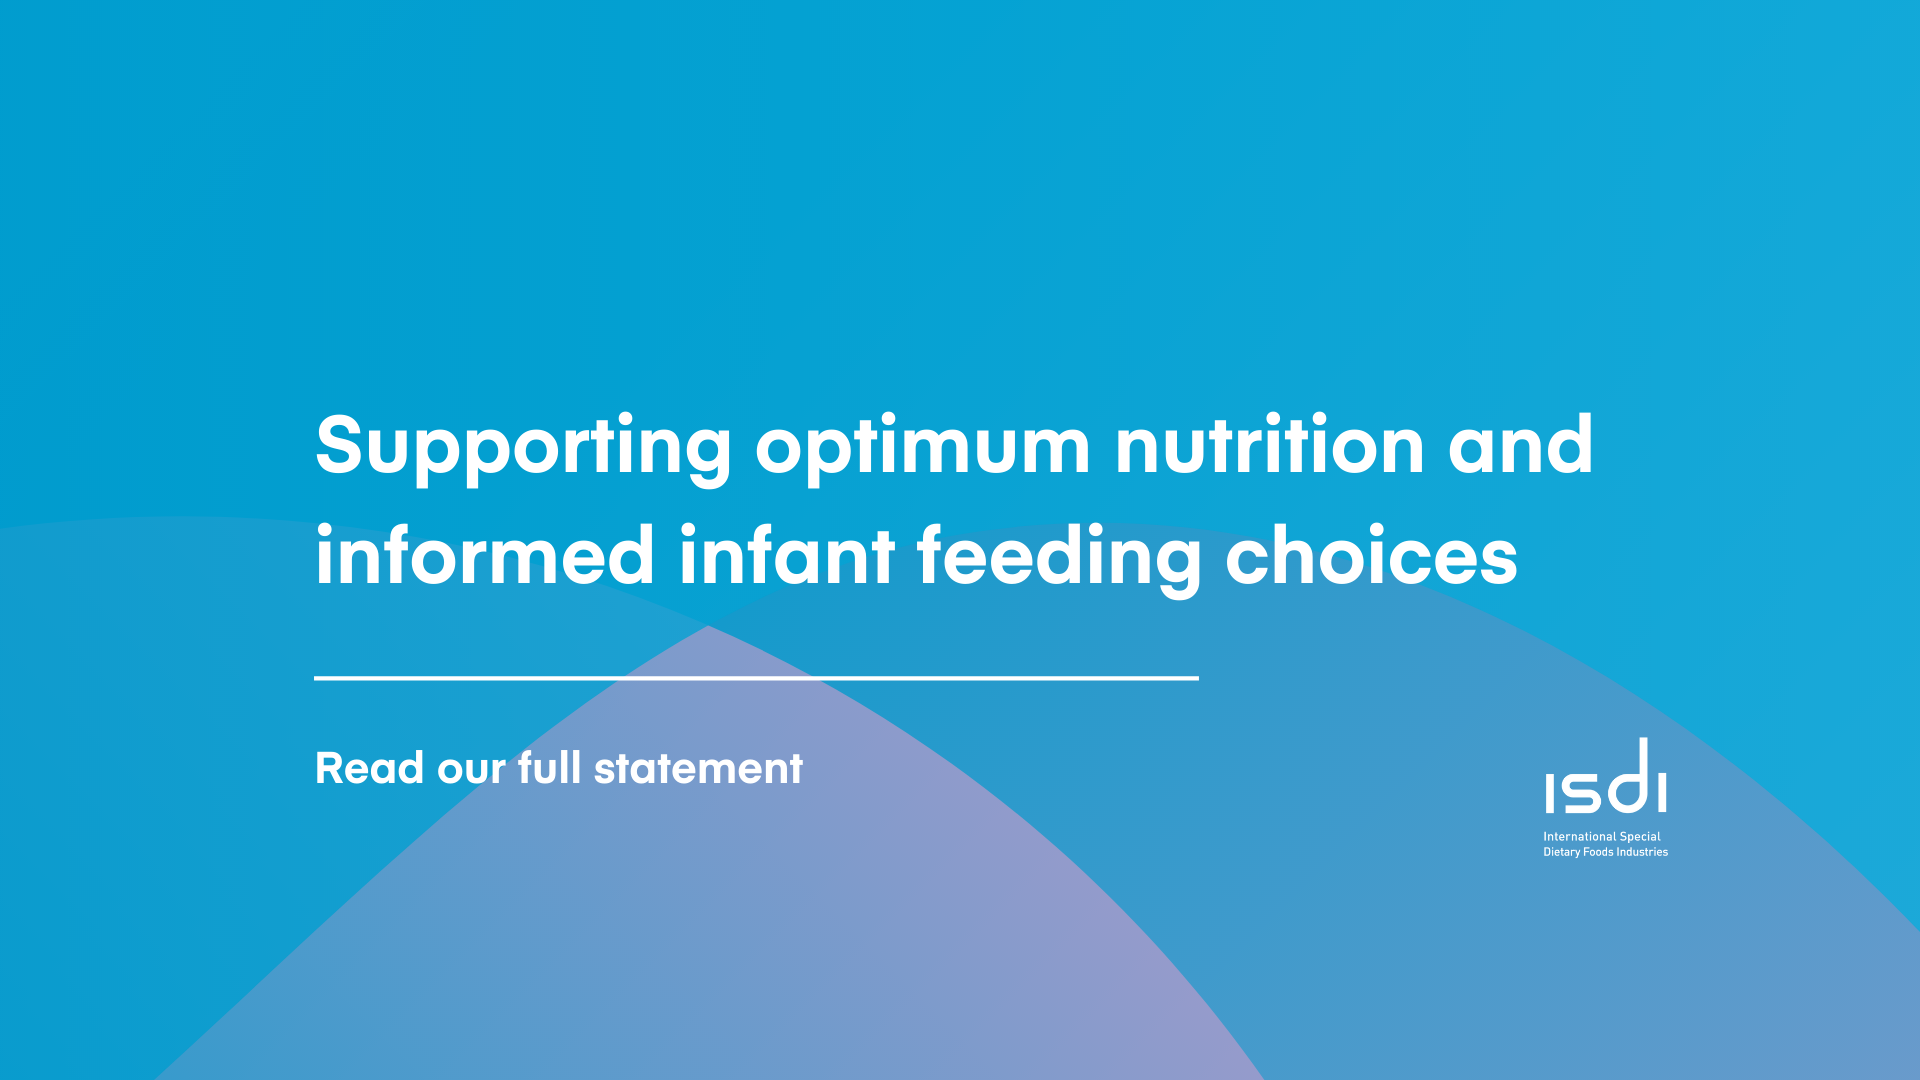 Working together to support optimum infant nutrition and informed infant feeding choices